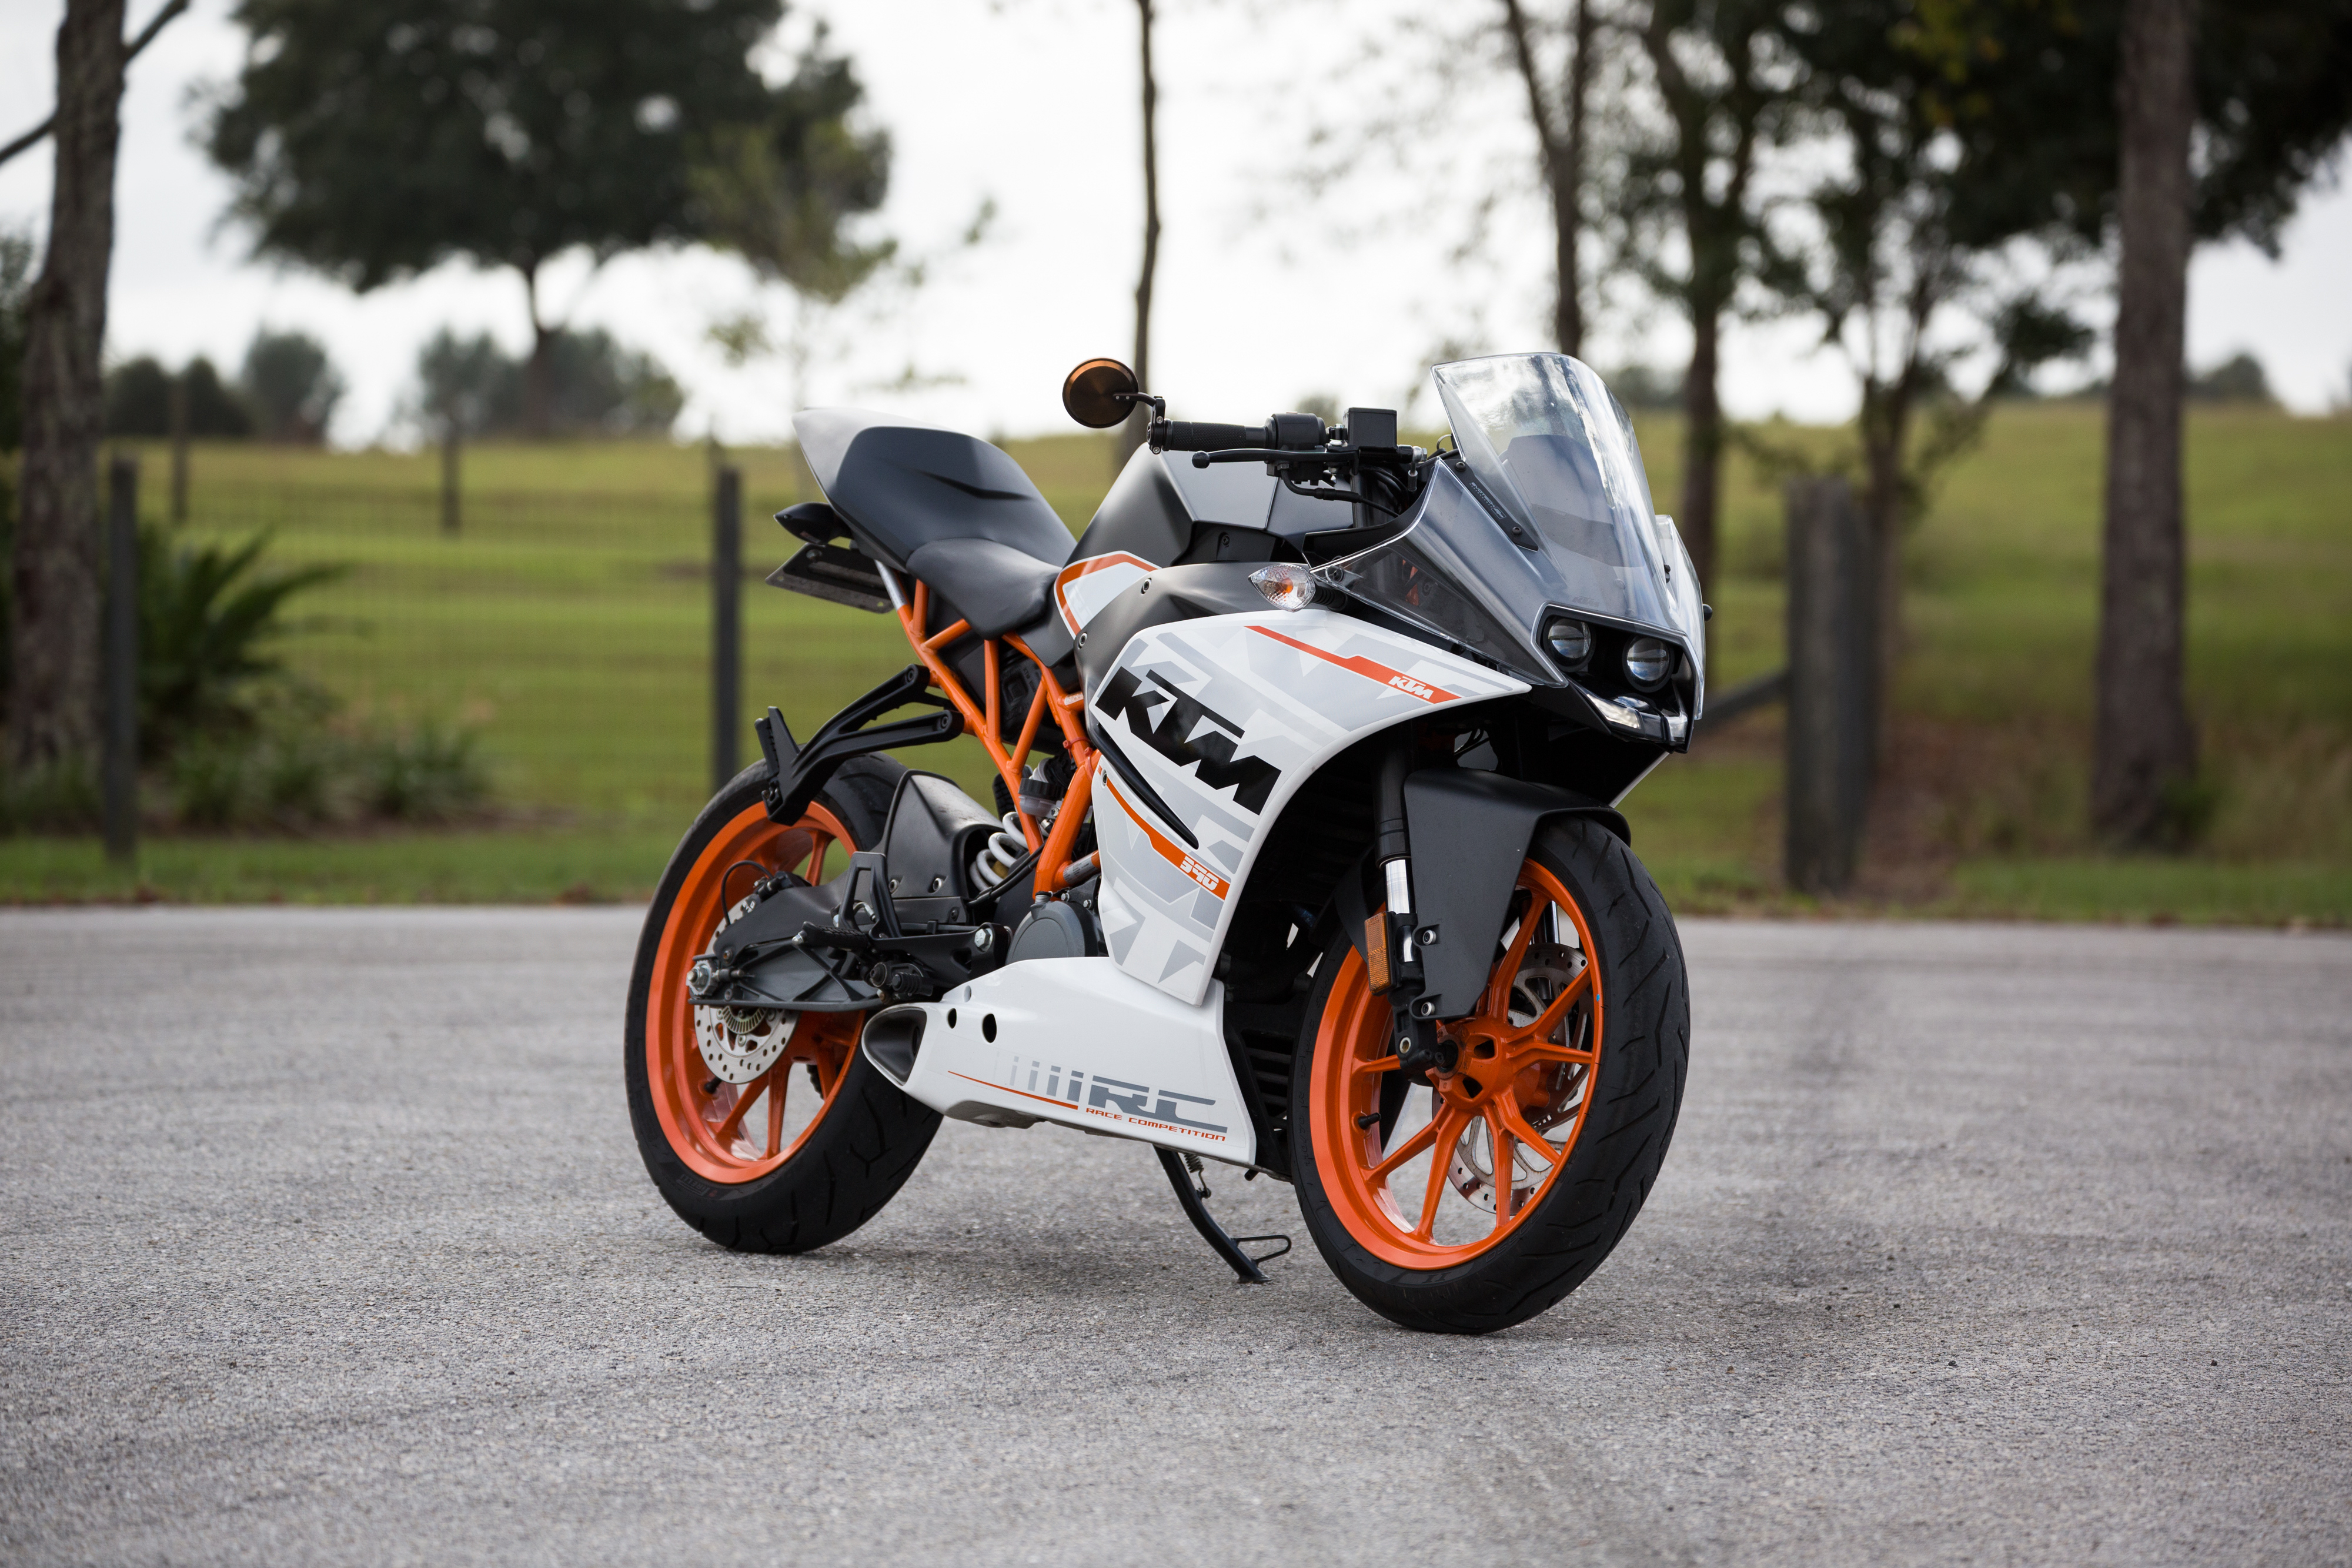 ktm, side view, motorcycles, motorcycle